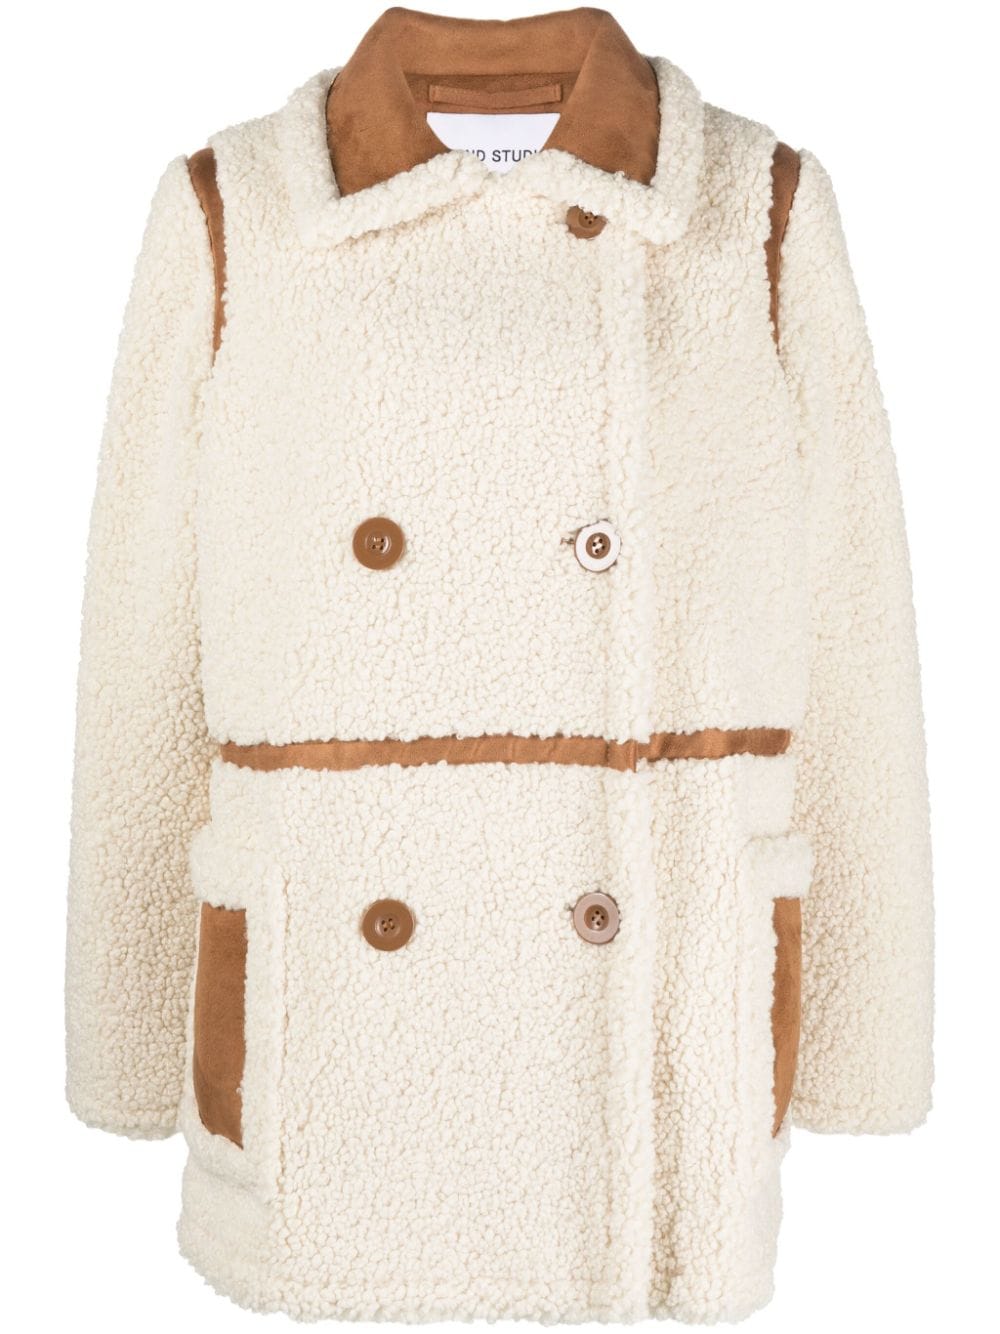 STAND STUDIO FAUX-SHEARLING DOUBLE-BREASTED COAT